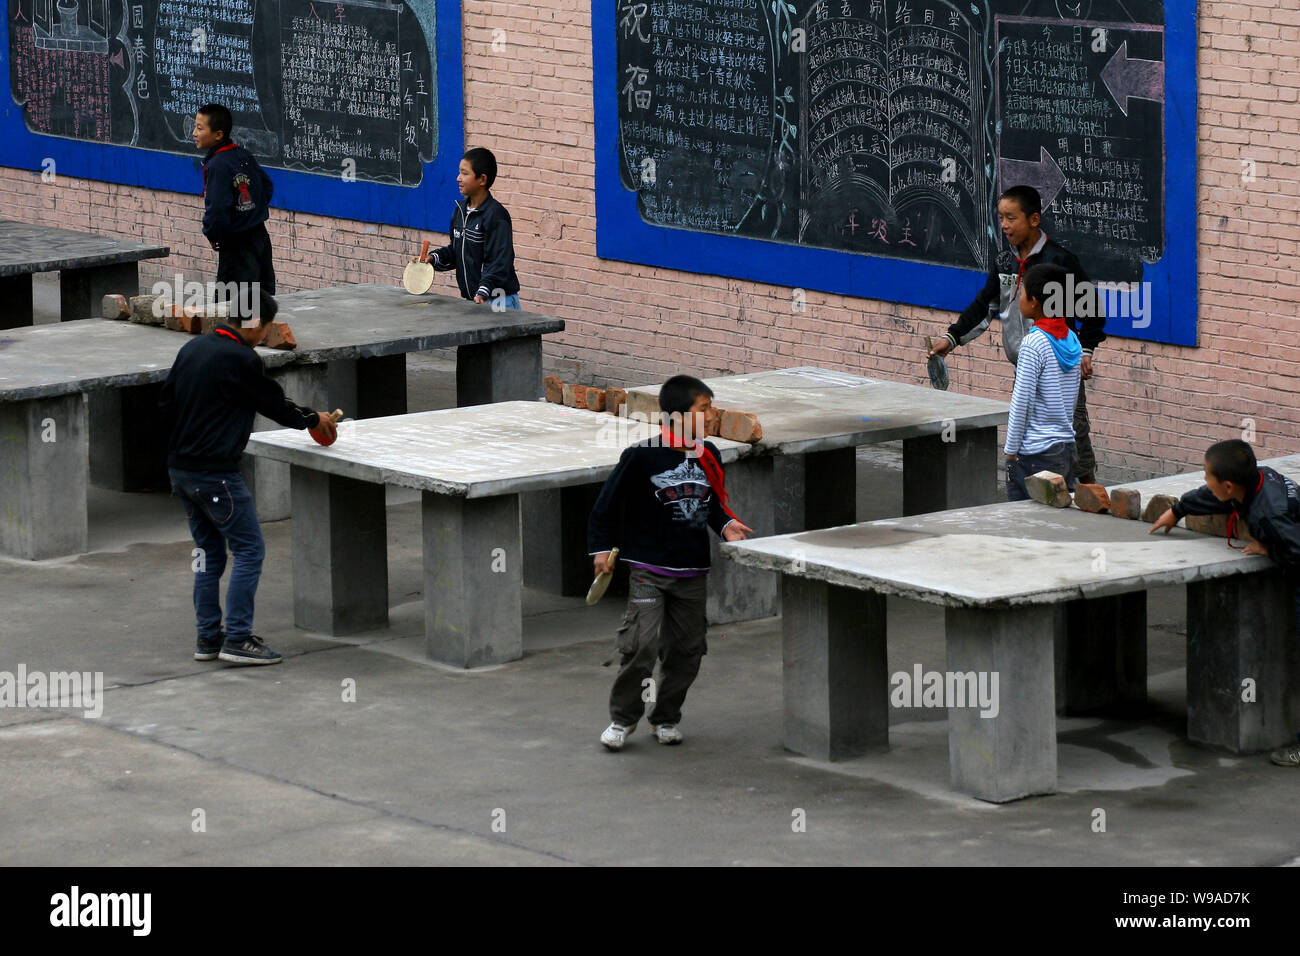 Hui ethnic students play table tennis at the Heping Primary School in Linxia, northwest Chinas Gansu province, June 30, 2010.   Heping Primary School Stock Photo